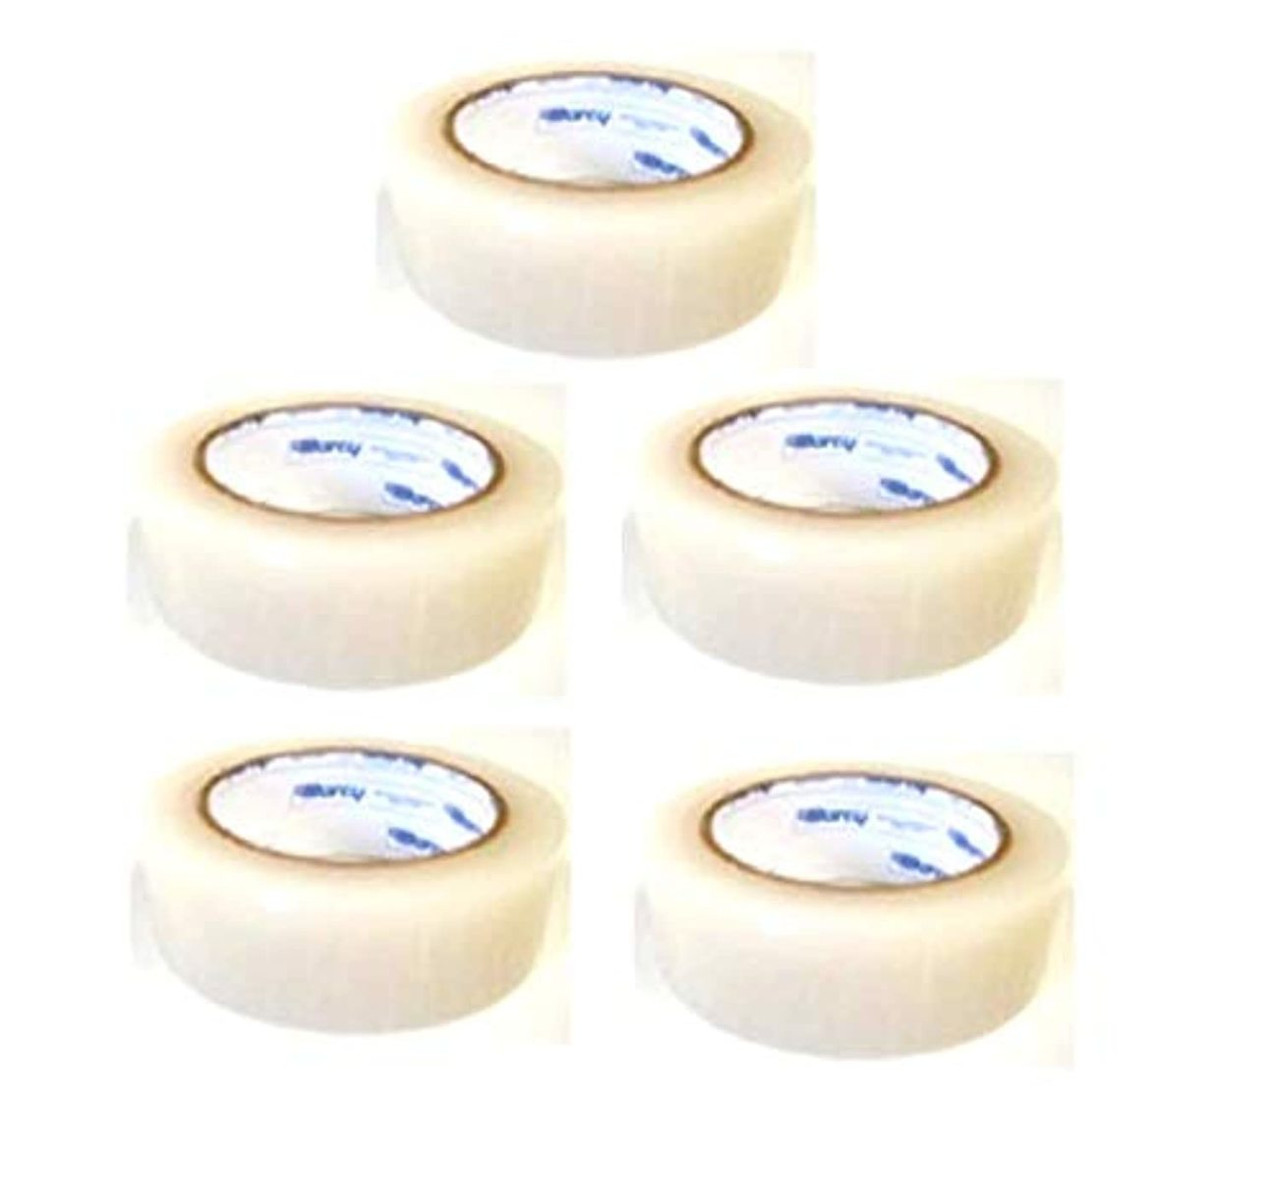 5 Rolls Molding Tape - All Weather, No Residue - 1.5" x 108' Clear